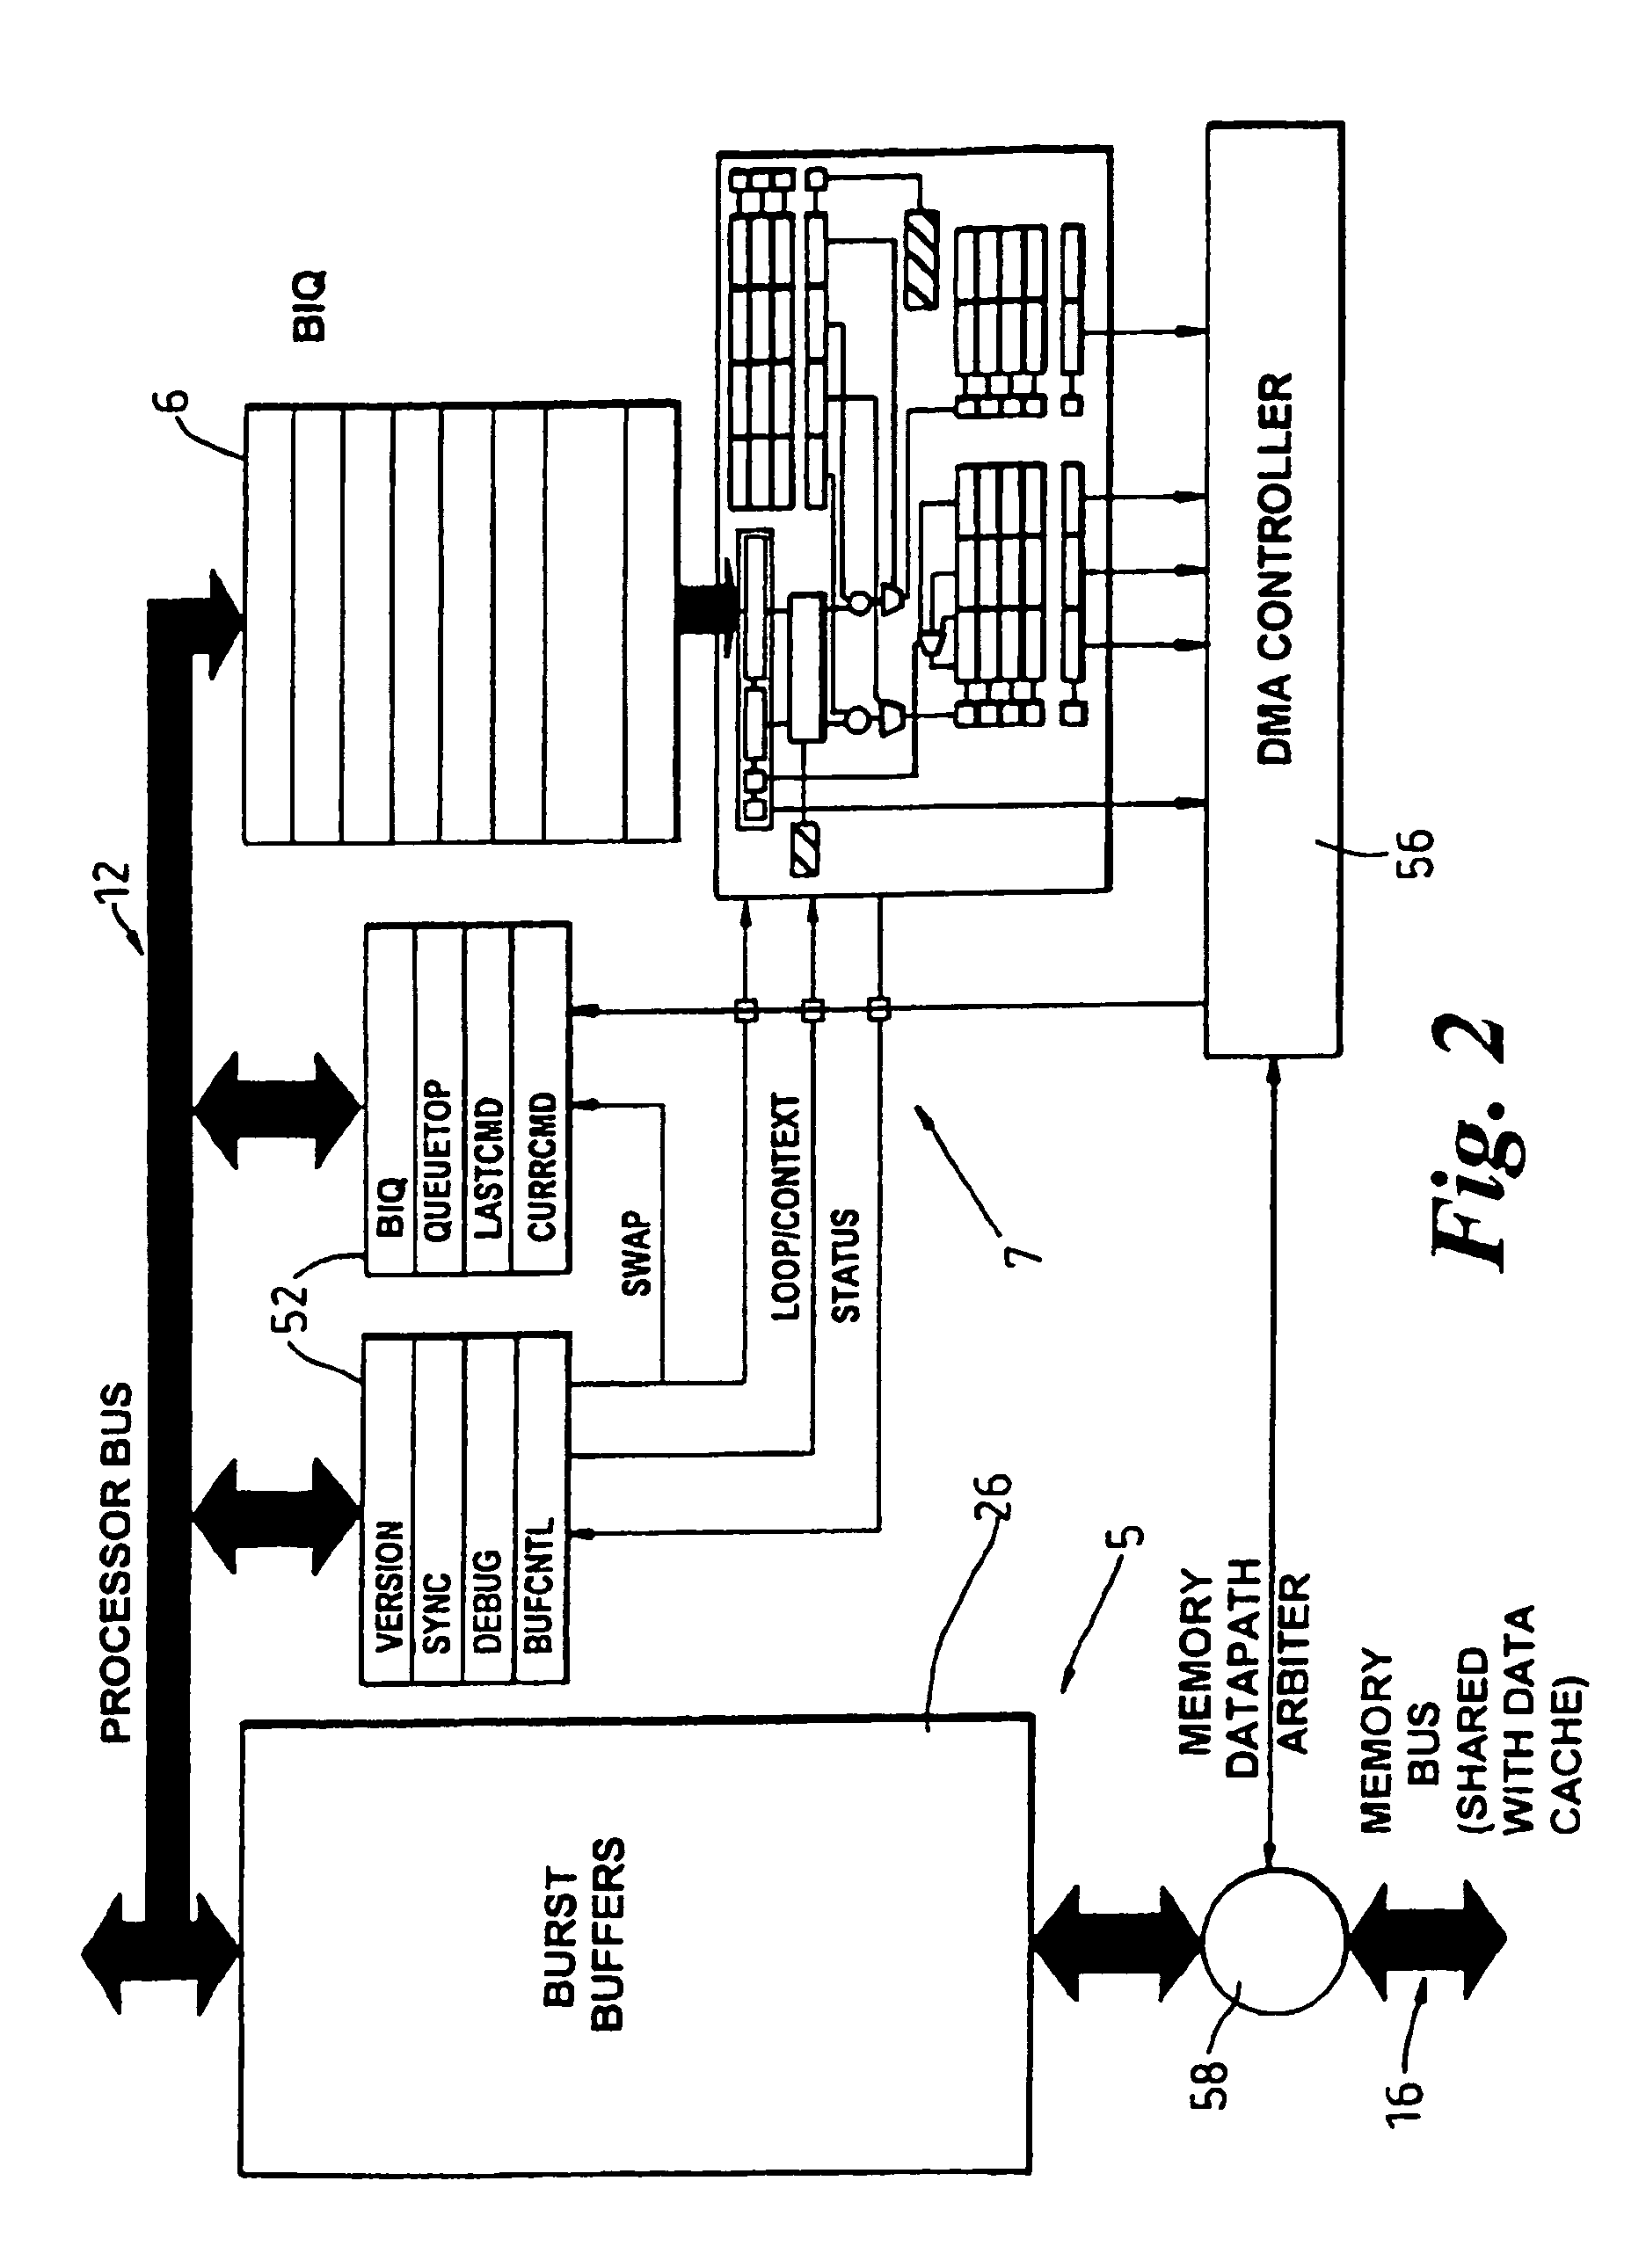 Computer architecture containing processor and decoupled coprocessor